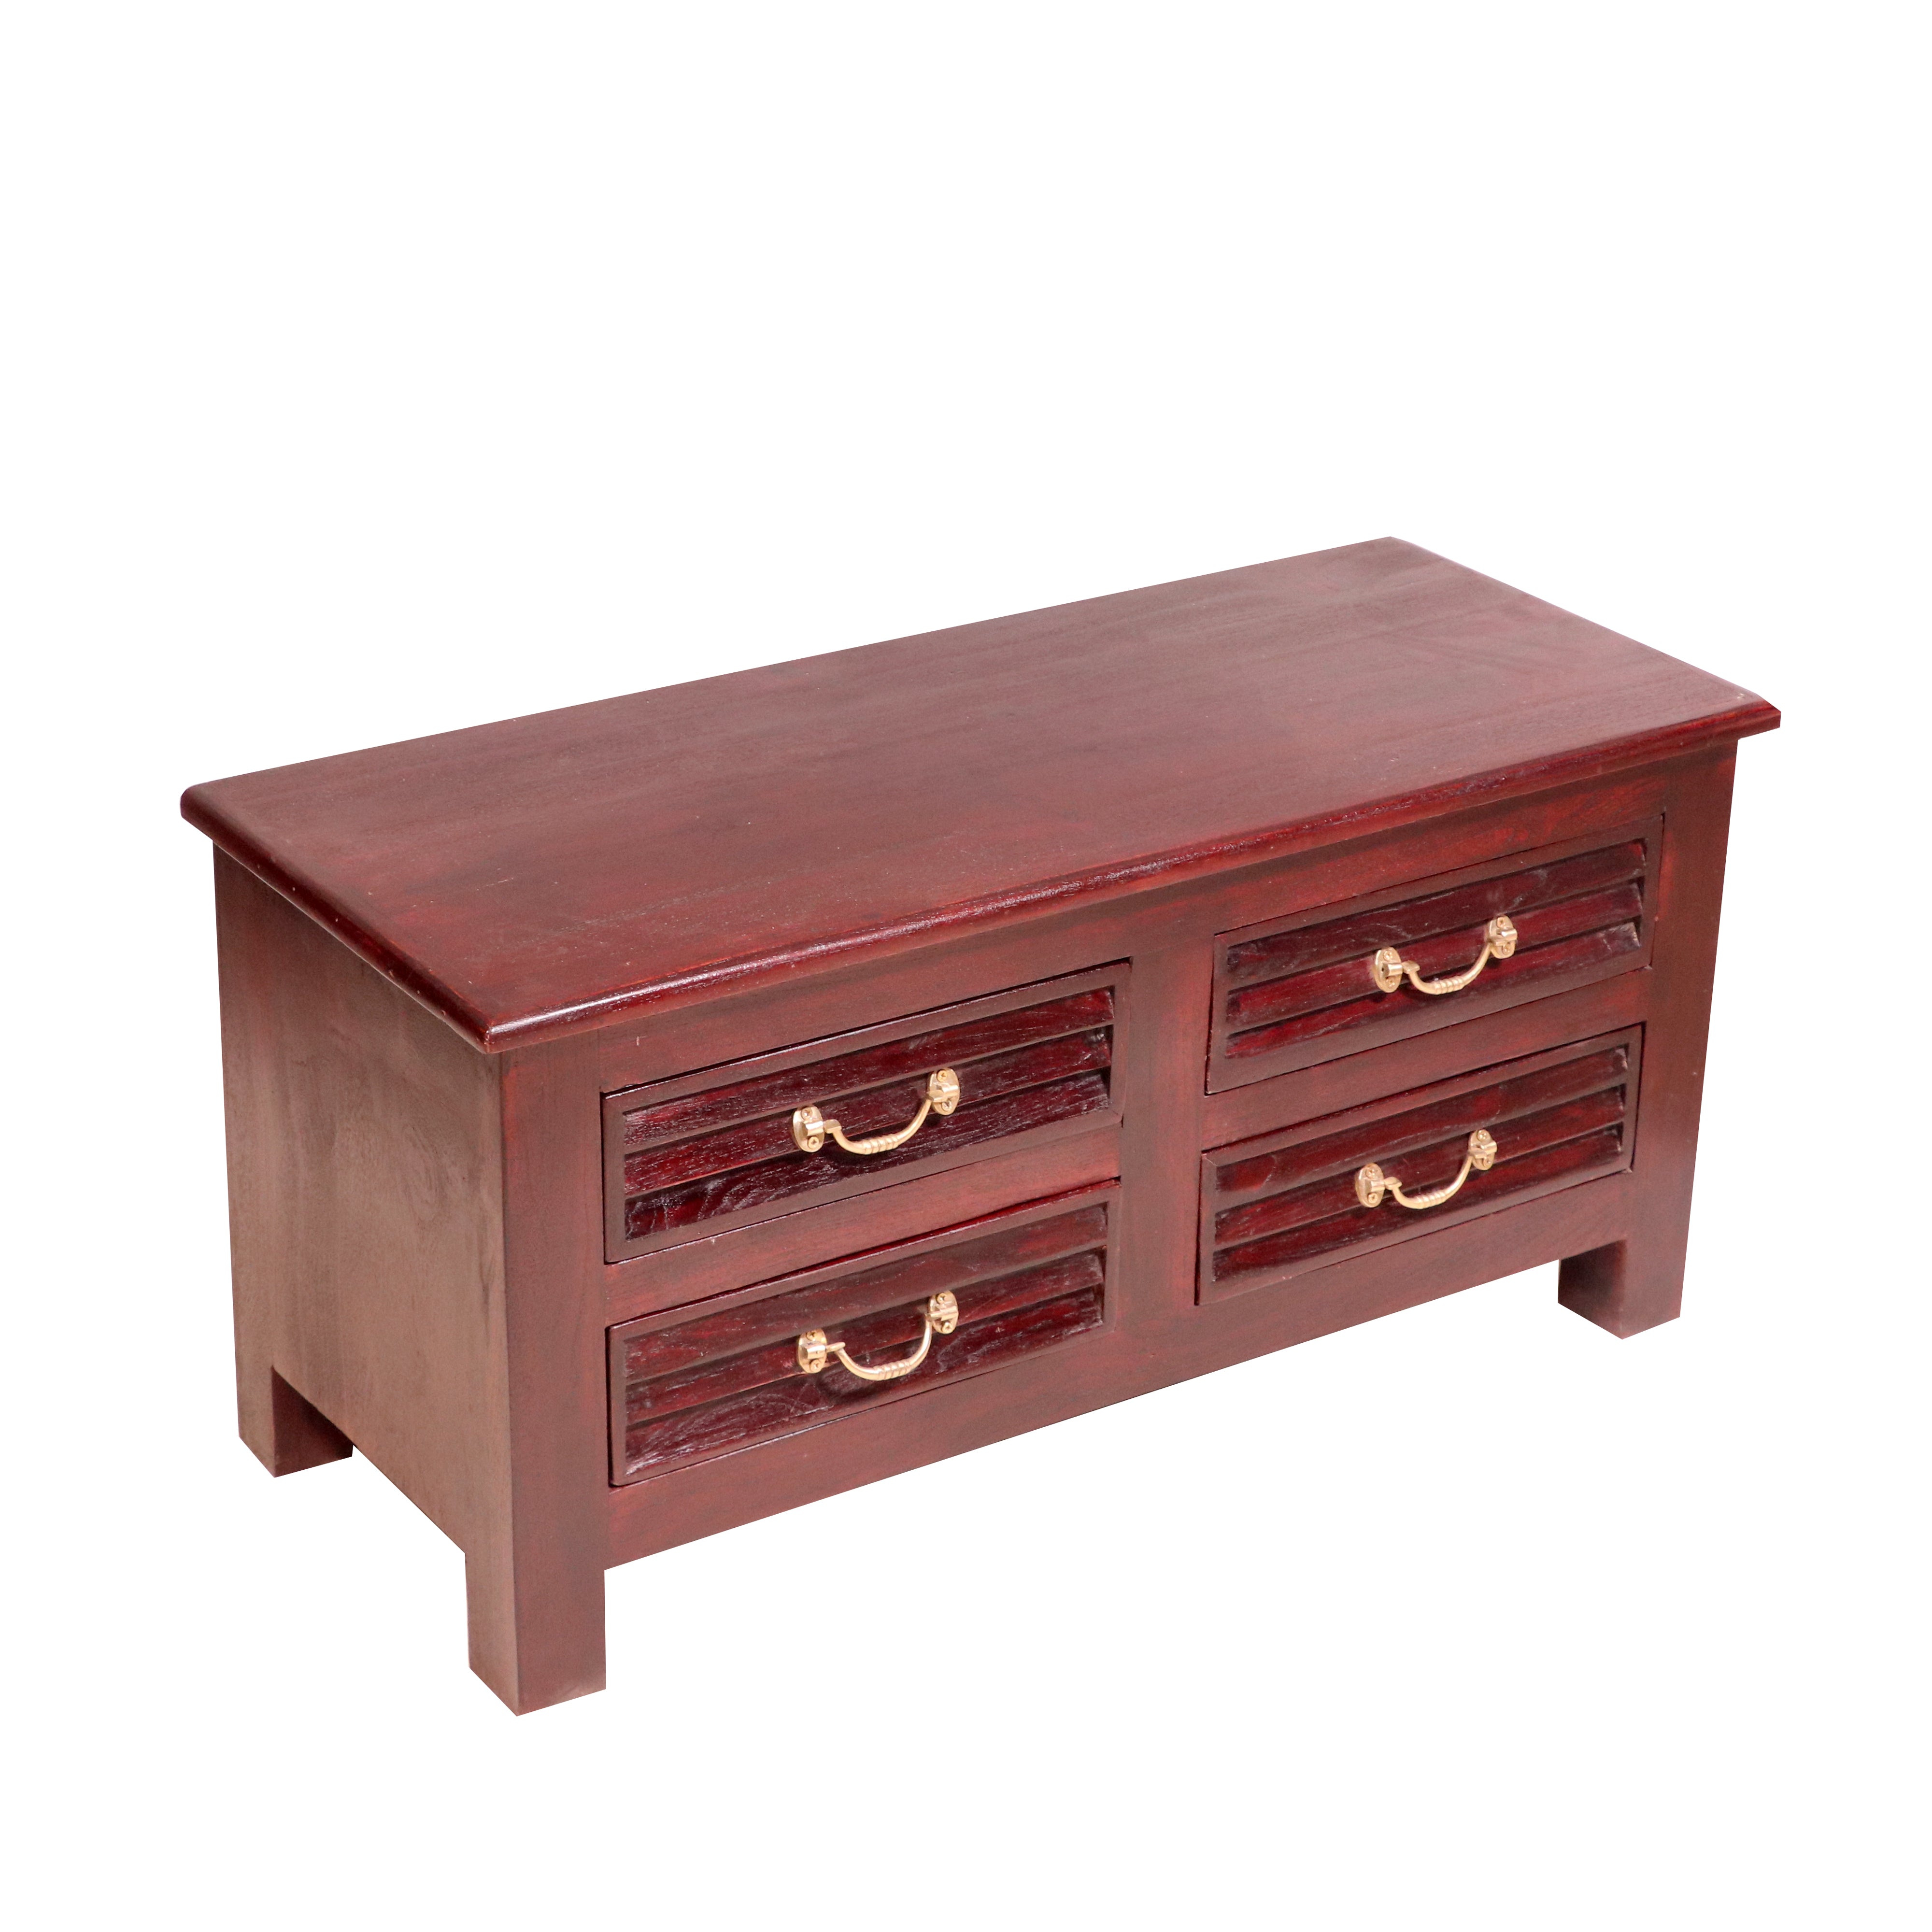 Solid wood 4 Drawer's chest with shutter design Bedside